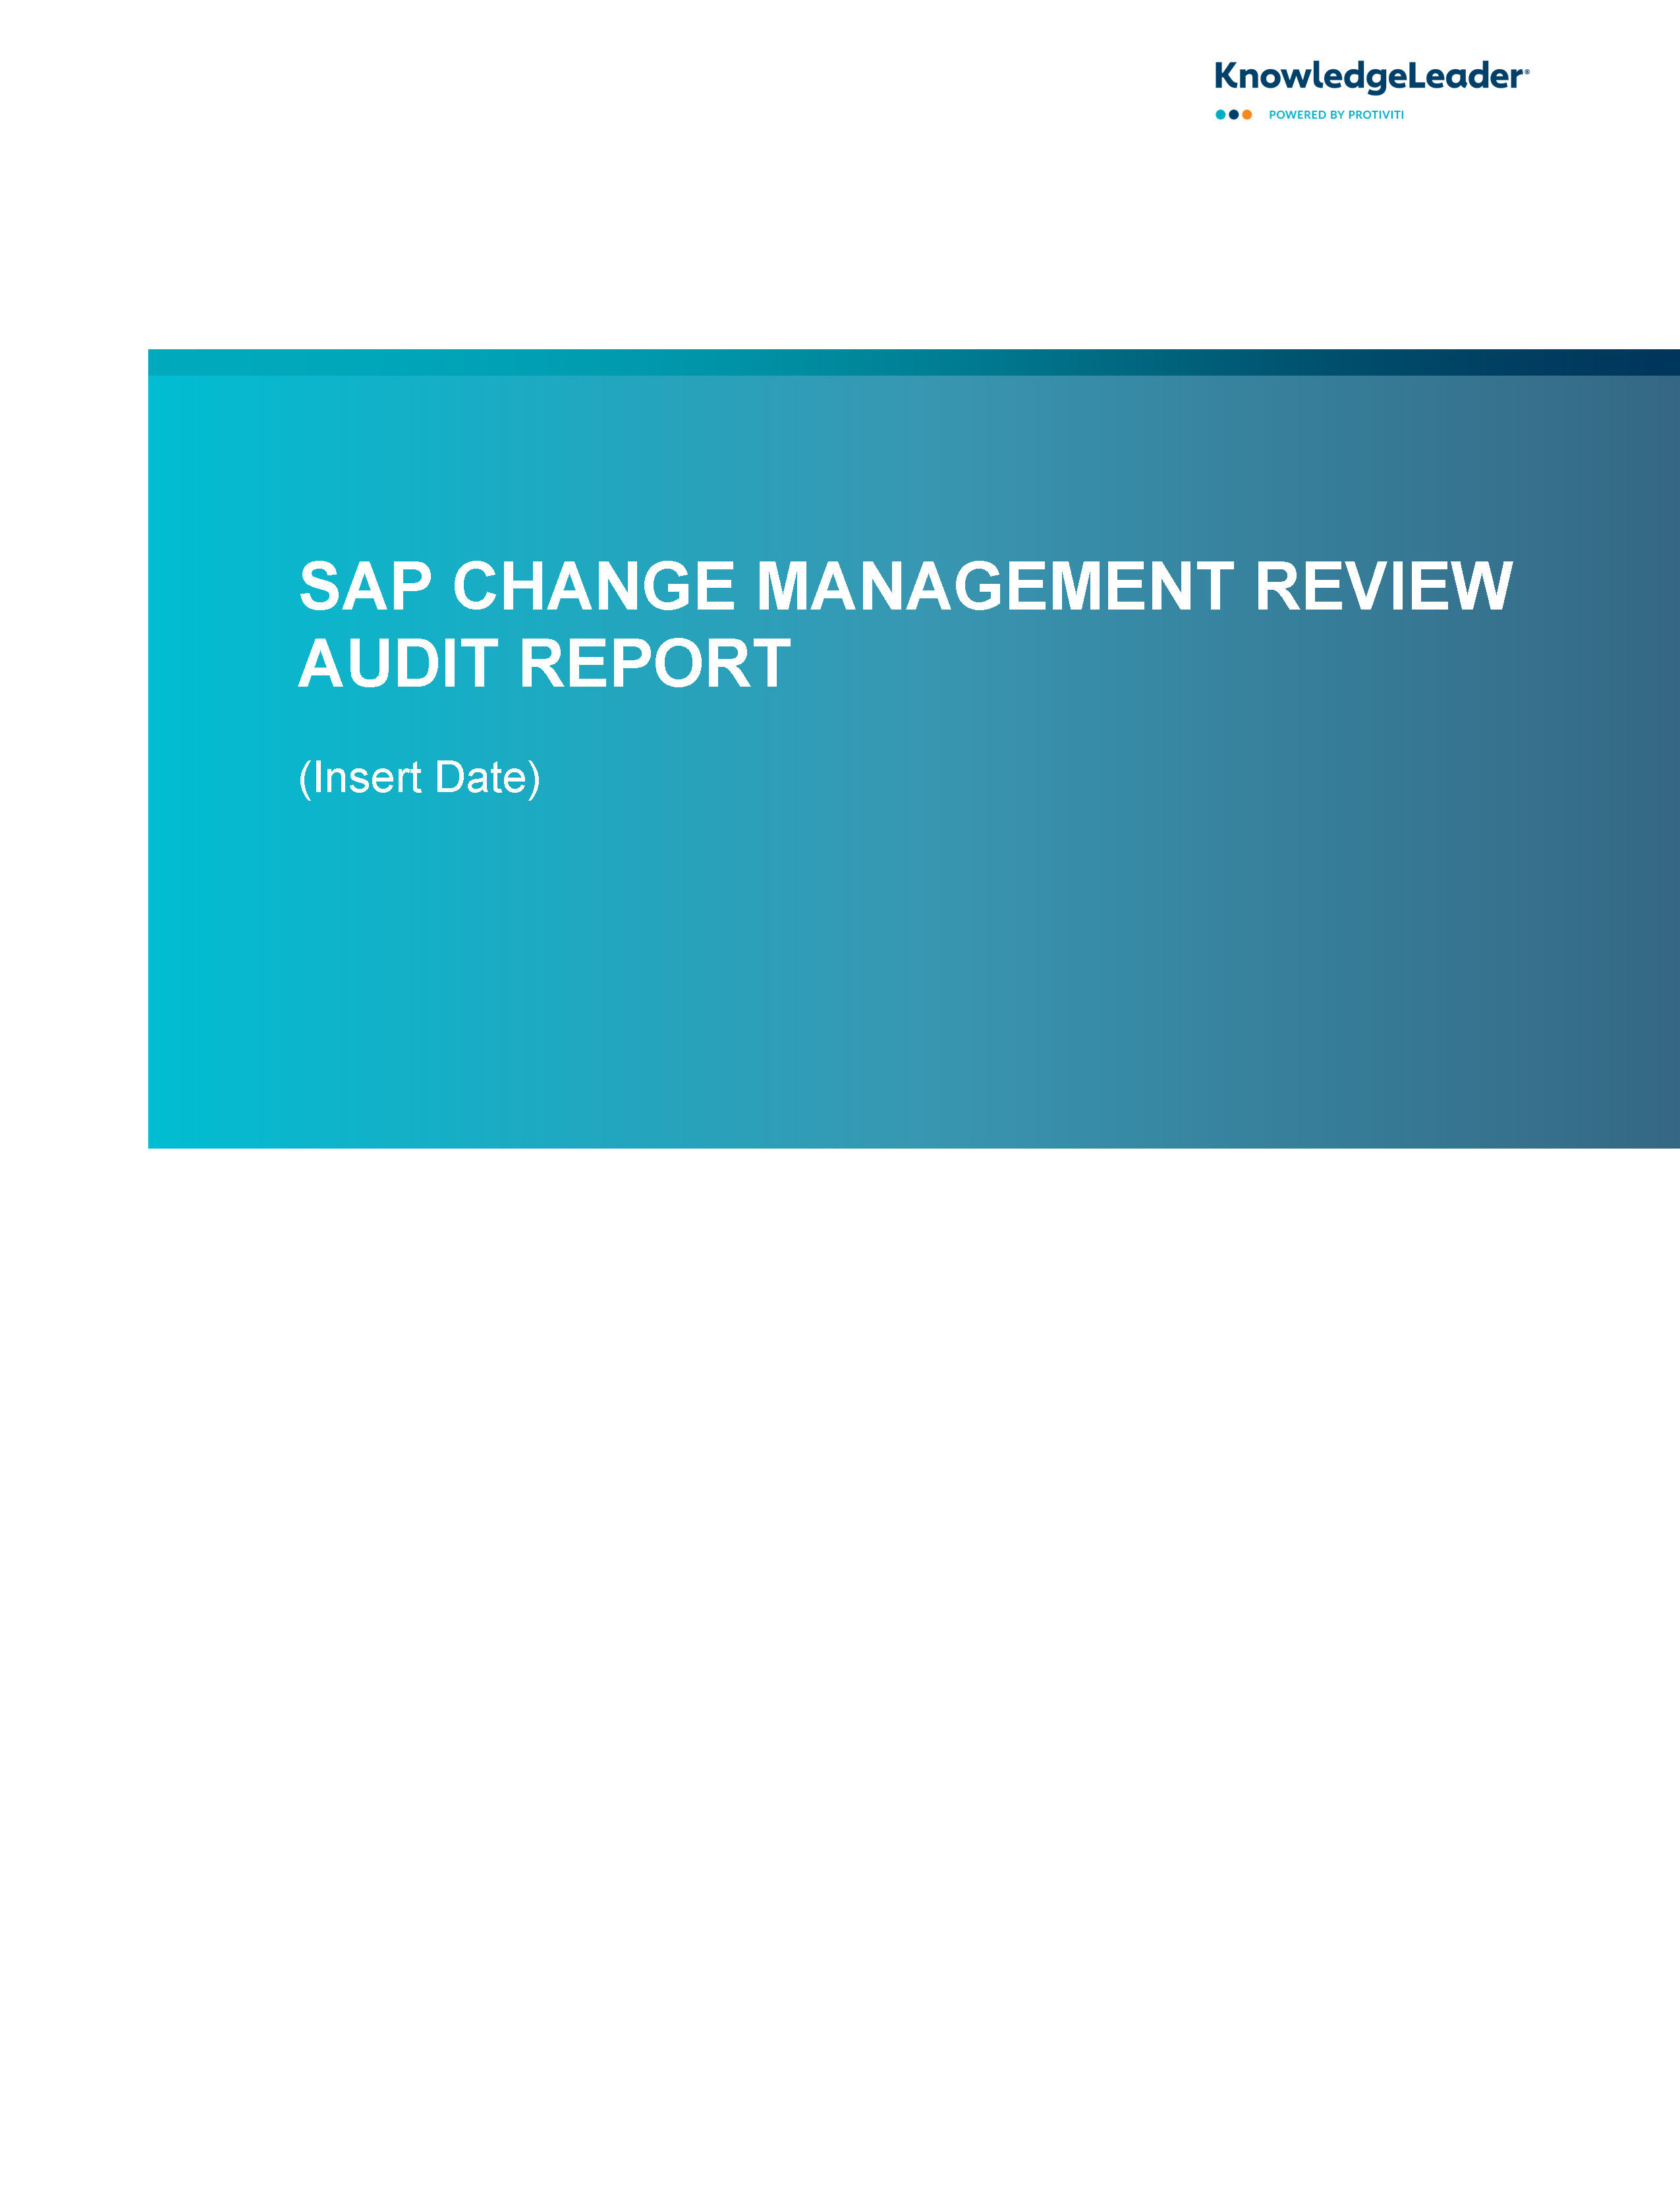 Screenshot of the first page of SAP Change Management Review Audit Report